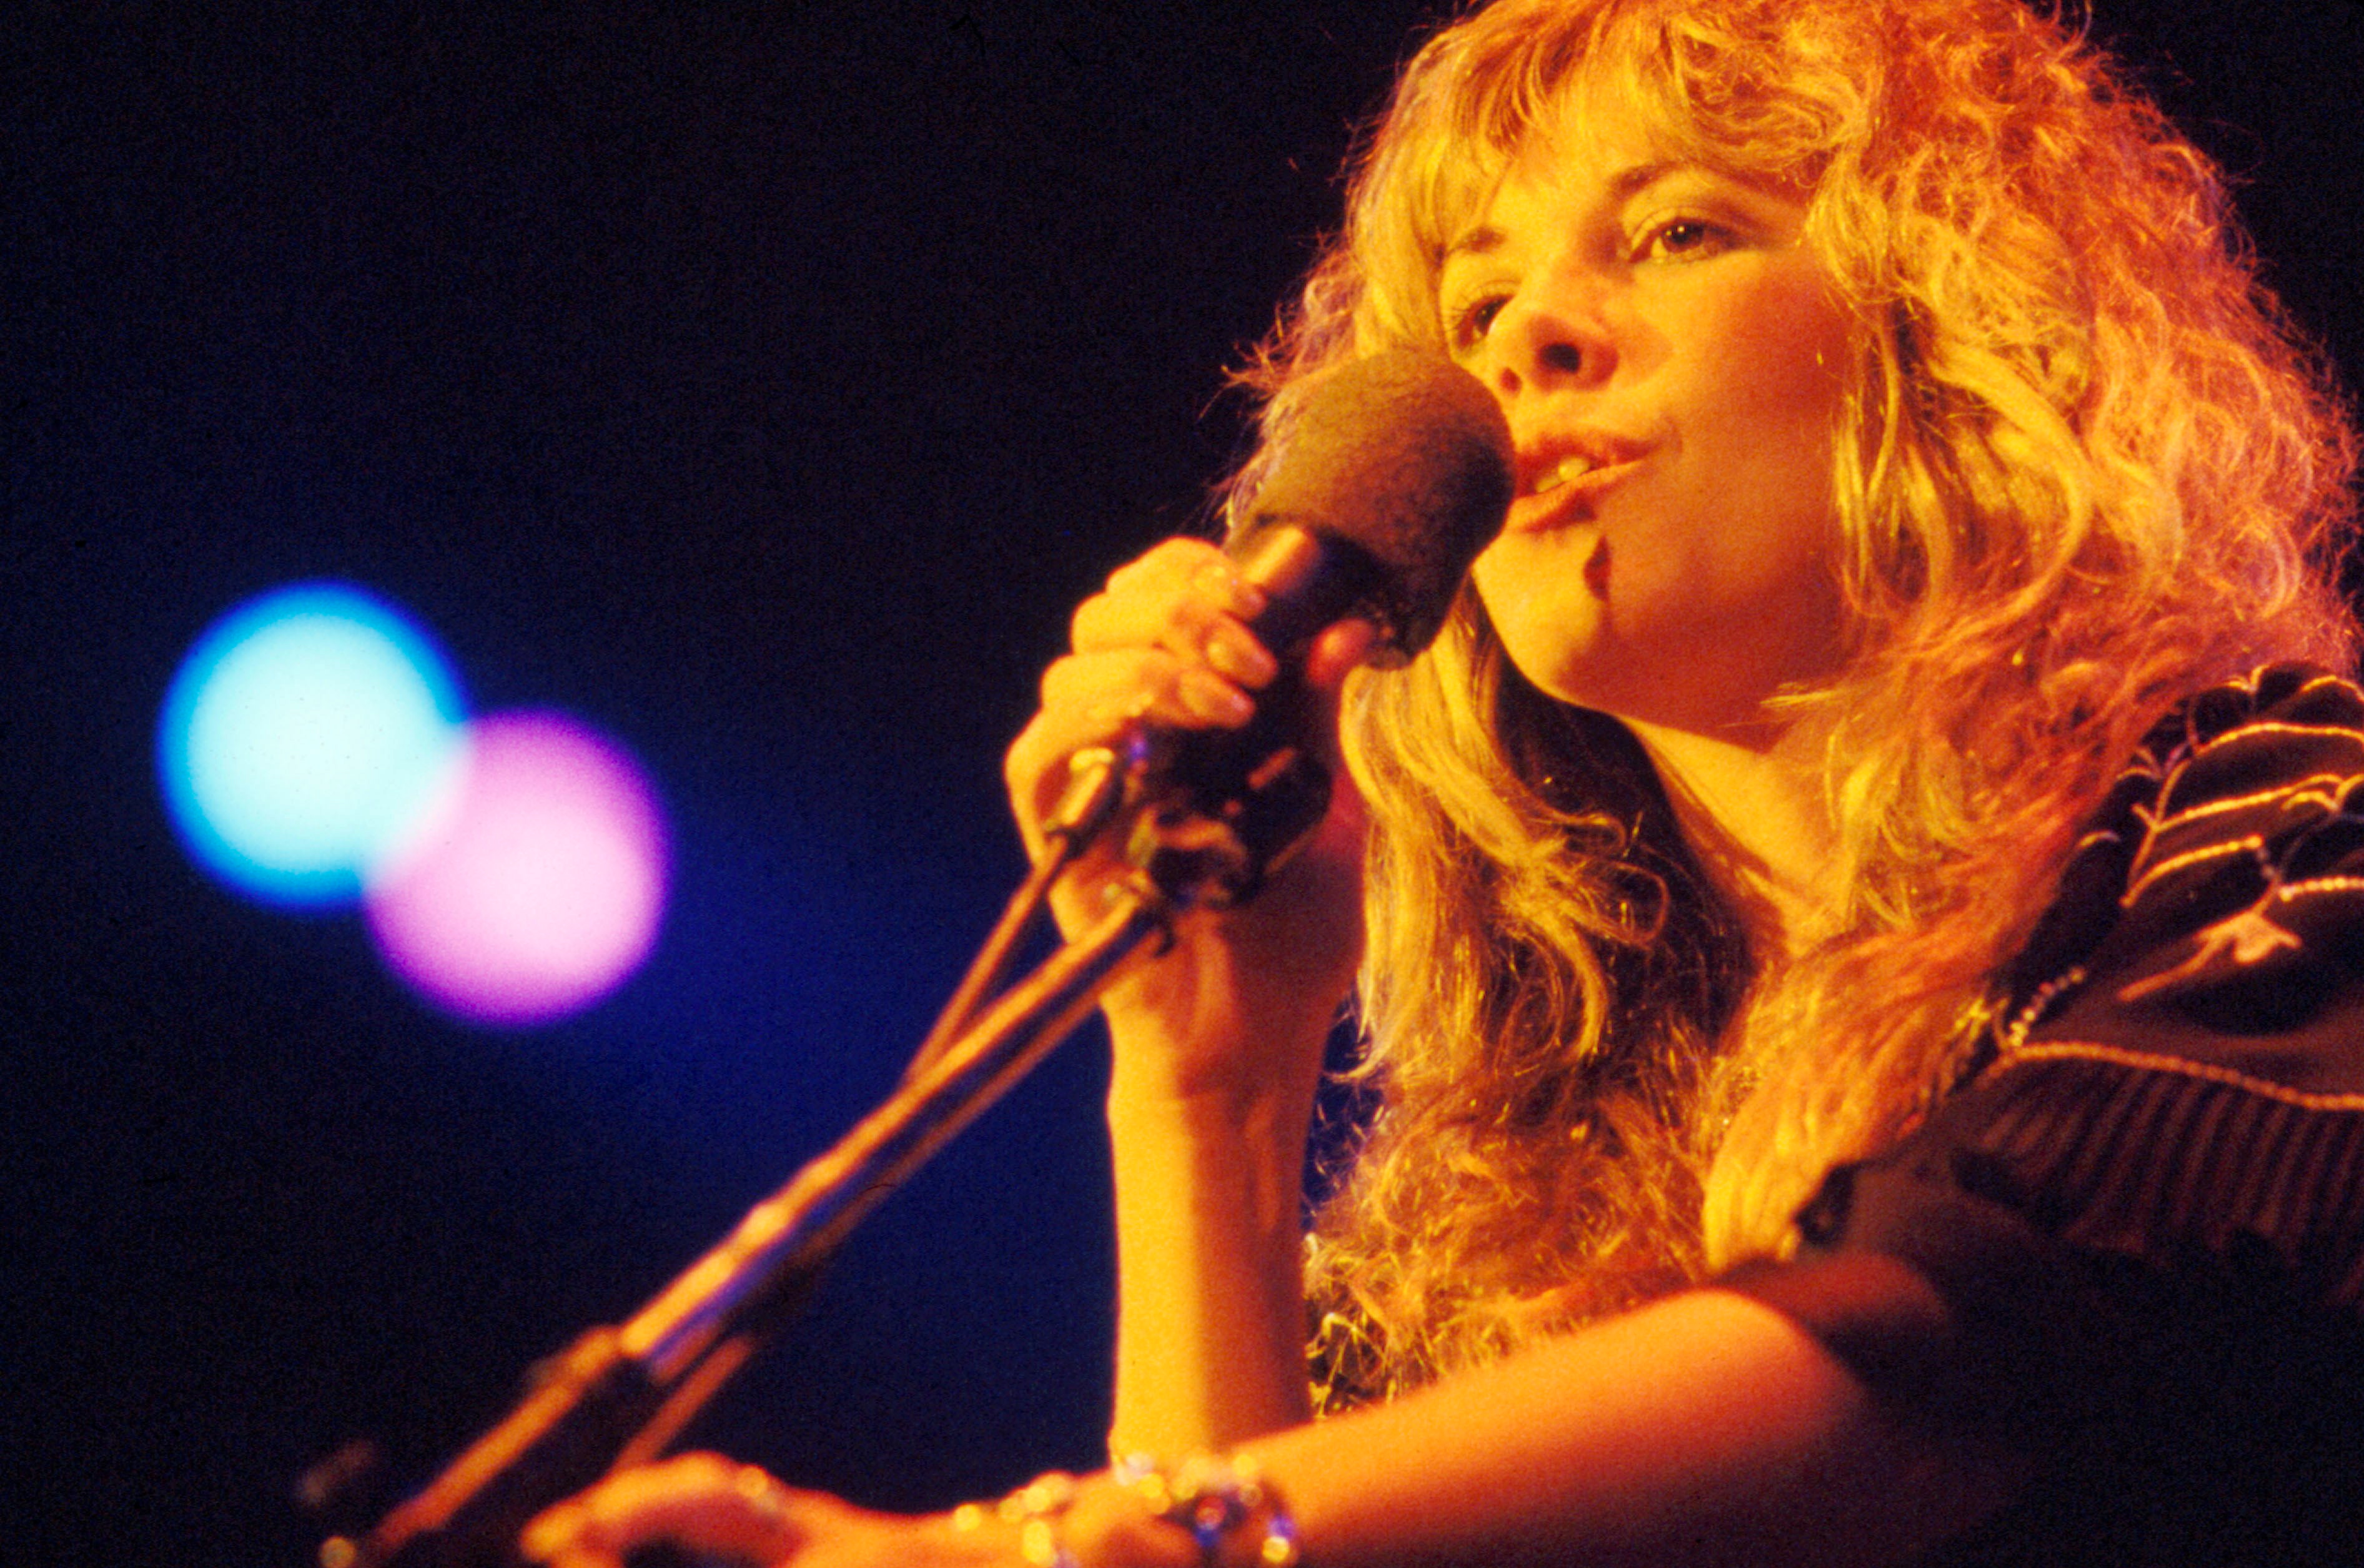 Stevie Nicks wears a striped shirt and holds a microphone.